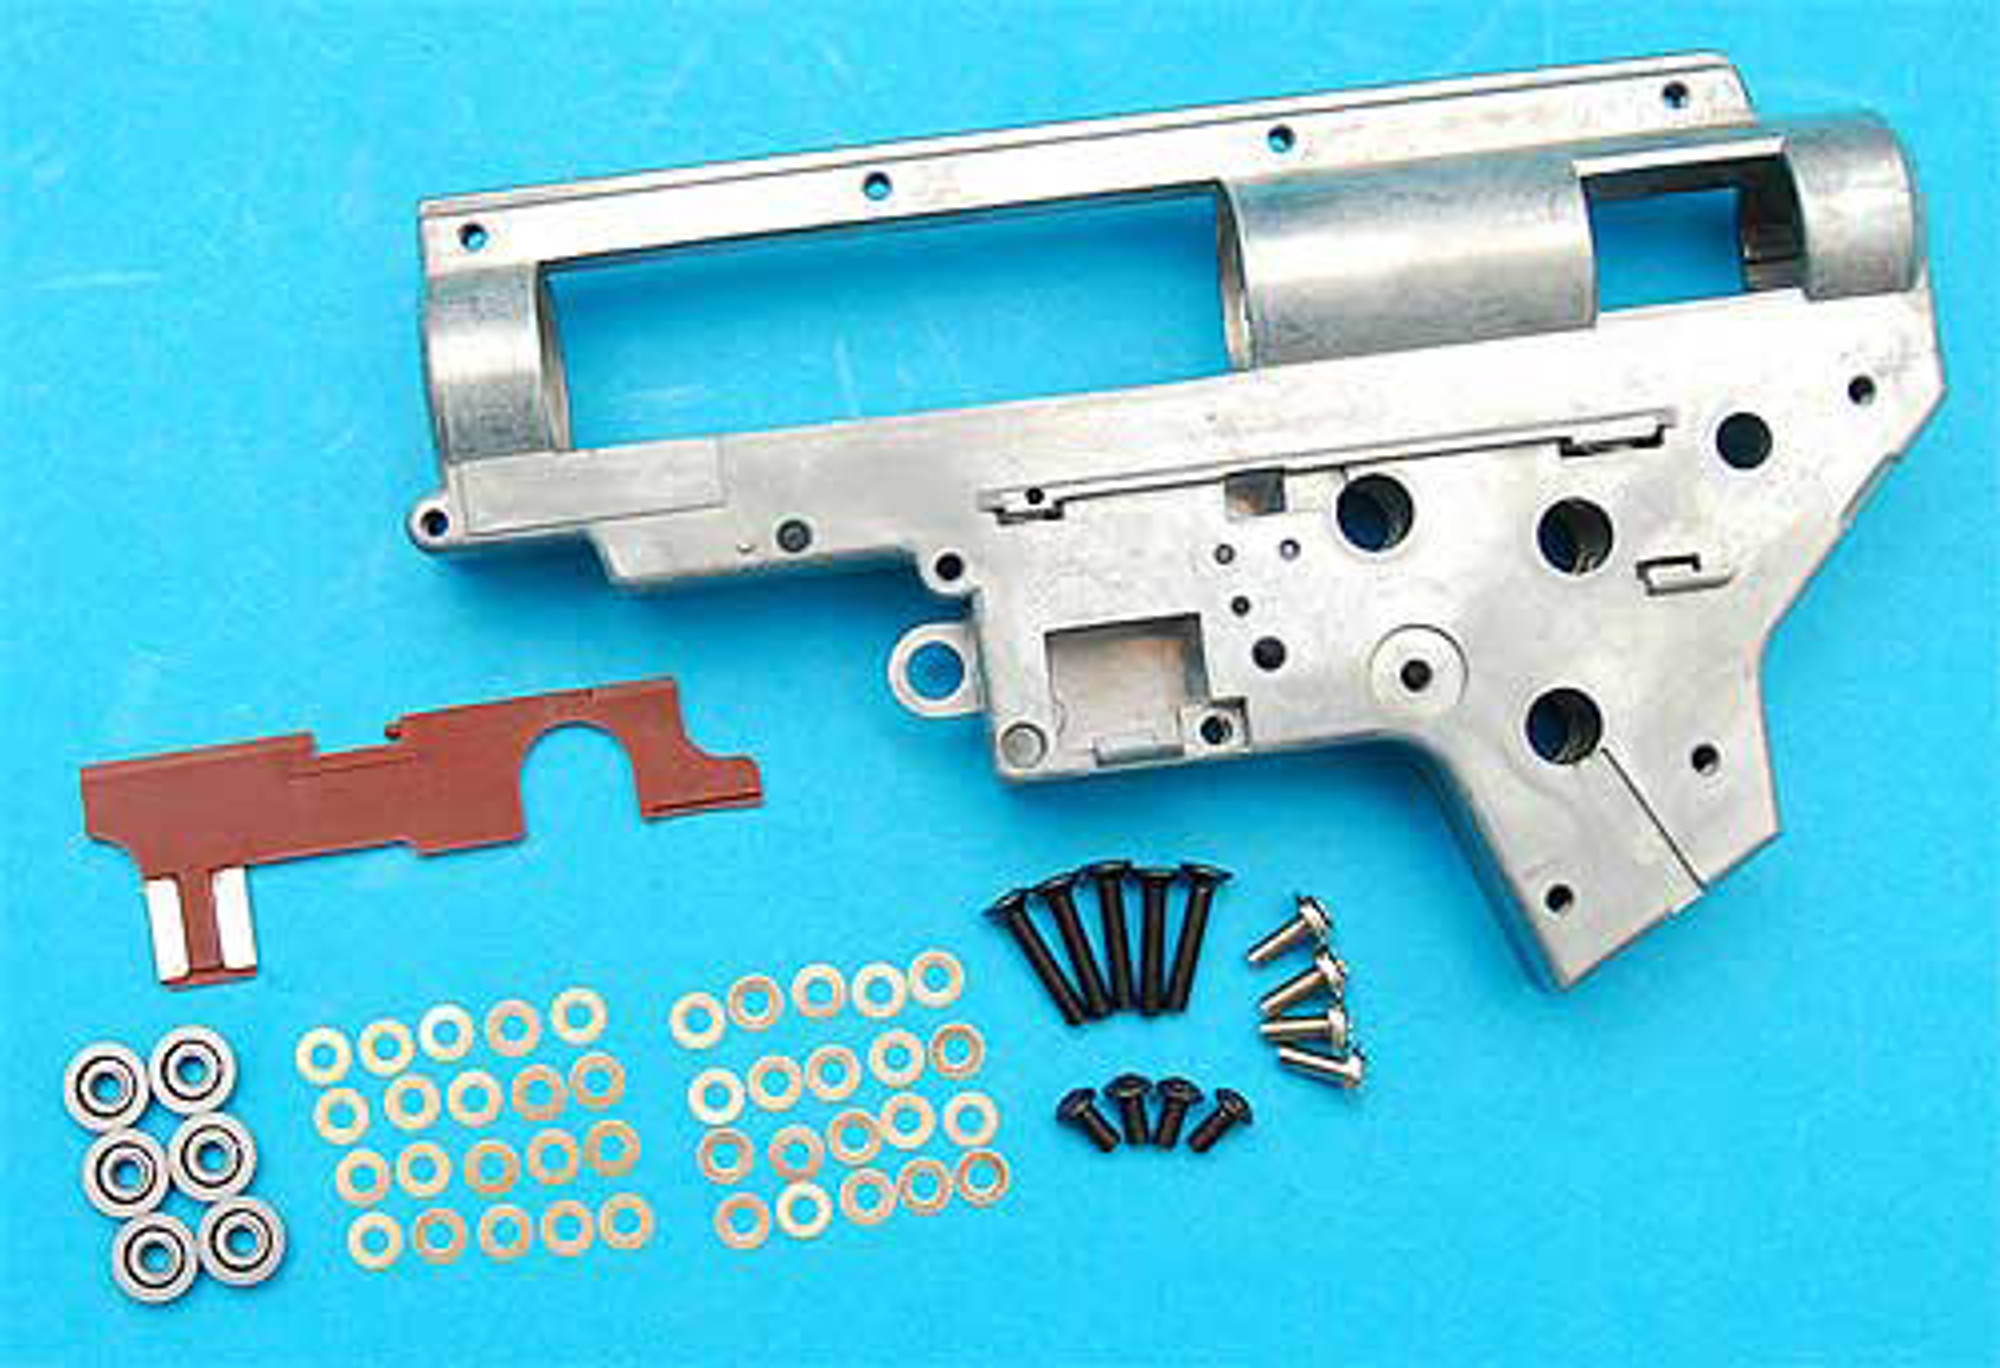 G&P Reinforced V.2 Gearbox Set with 8mm Bearing for M4 MP5 M16 Series AEG Rifle